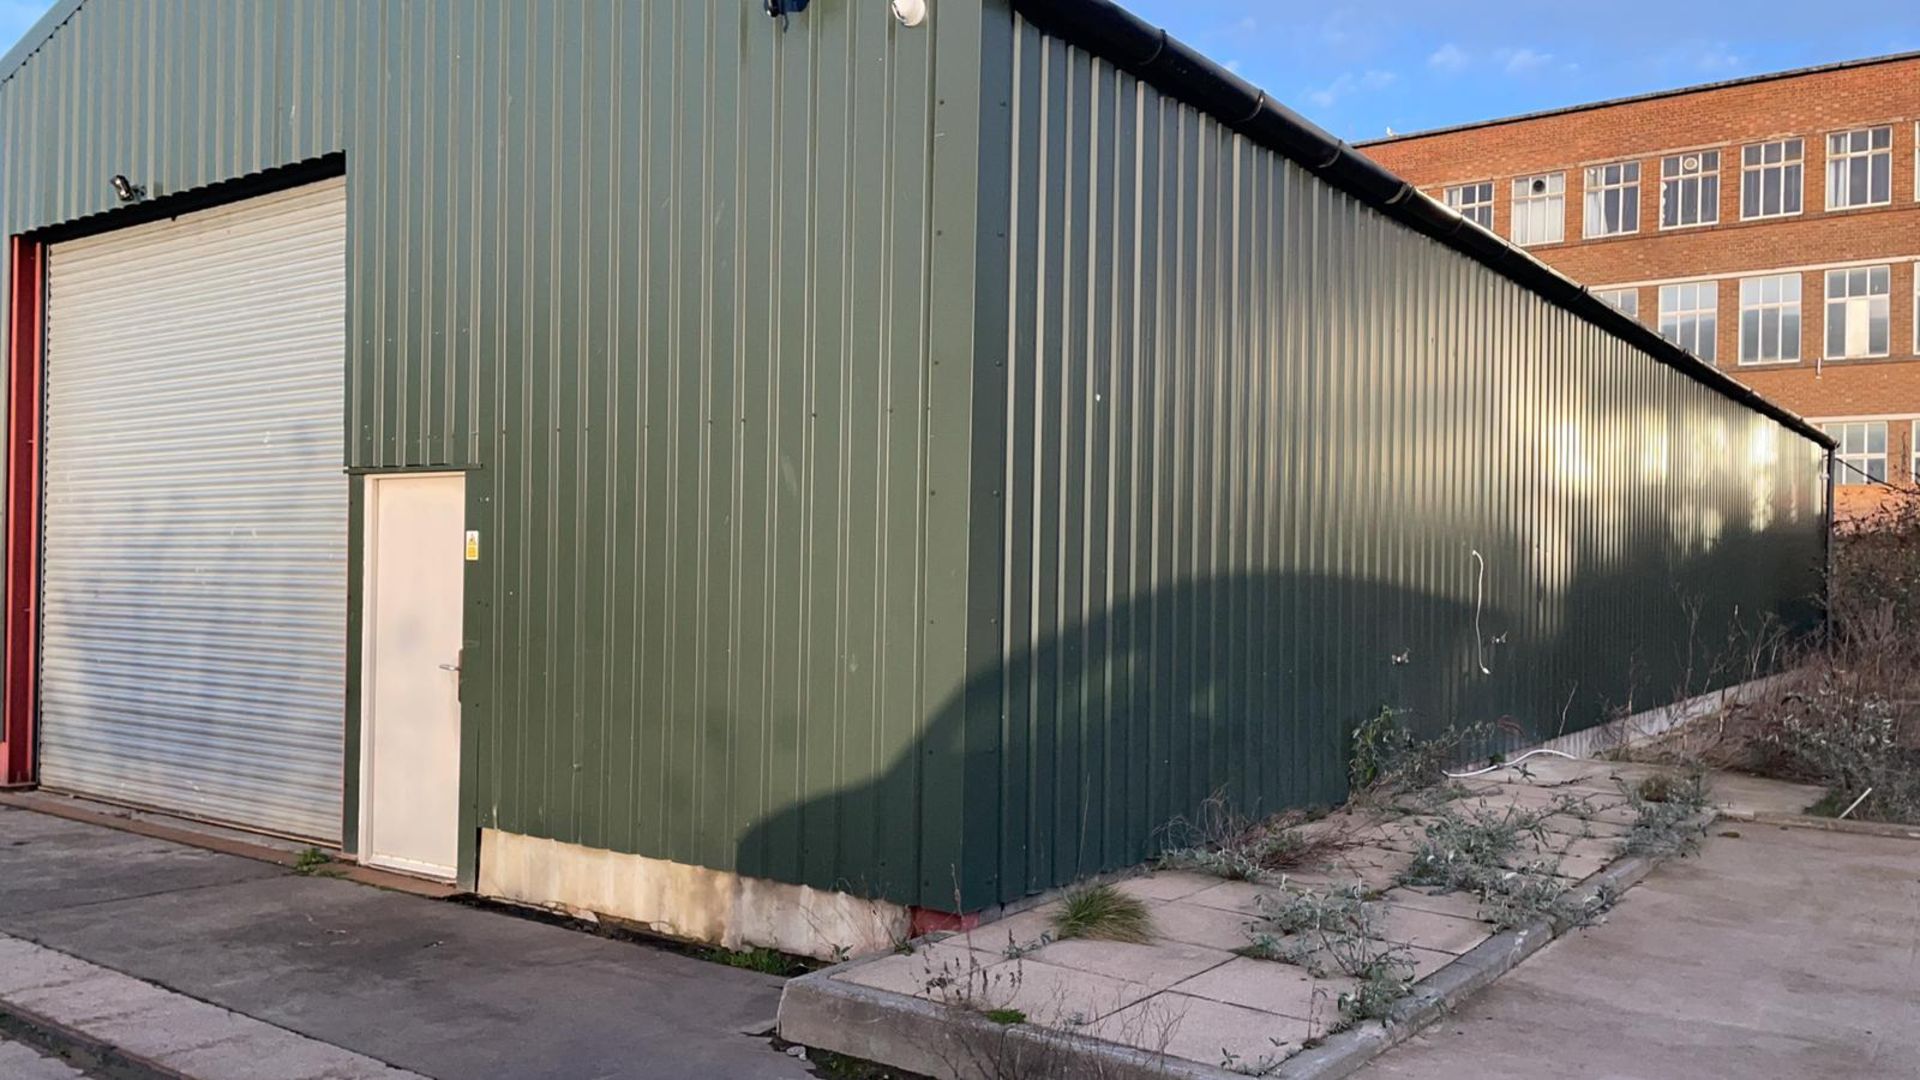 STEEL PORTAL FRAMED BUILDING, approx. 80ft x 40ft x 11ft to eaves, with profiled steel cladding to